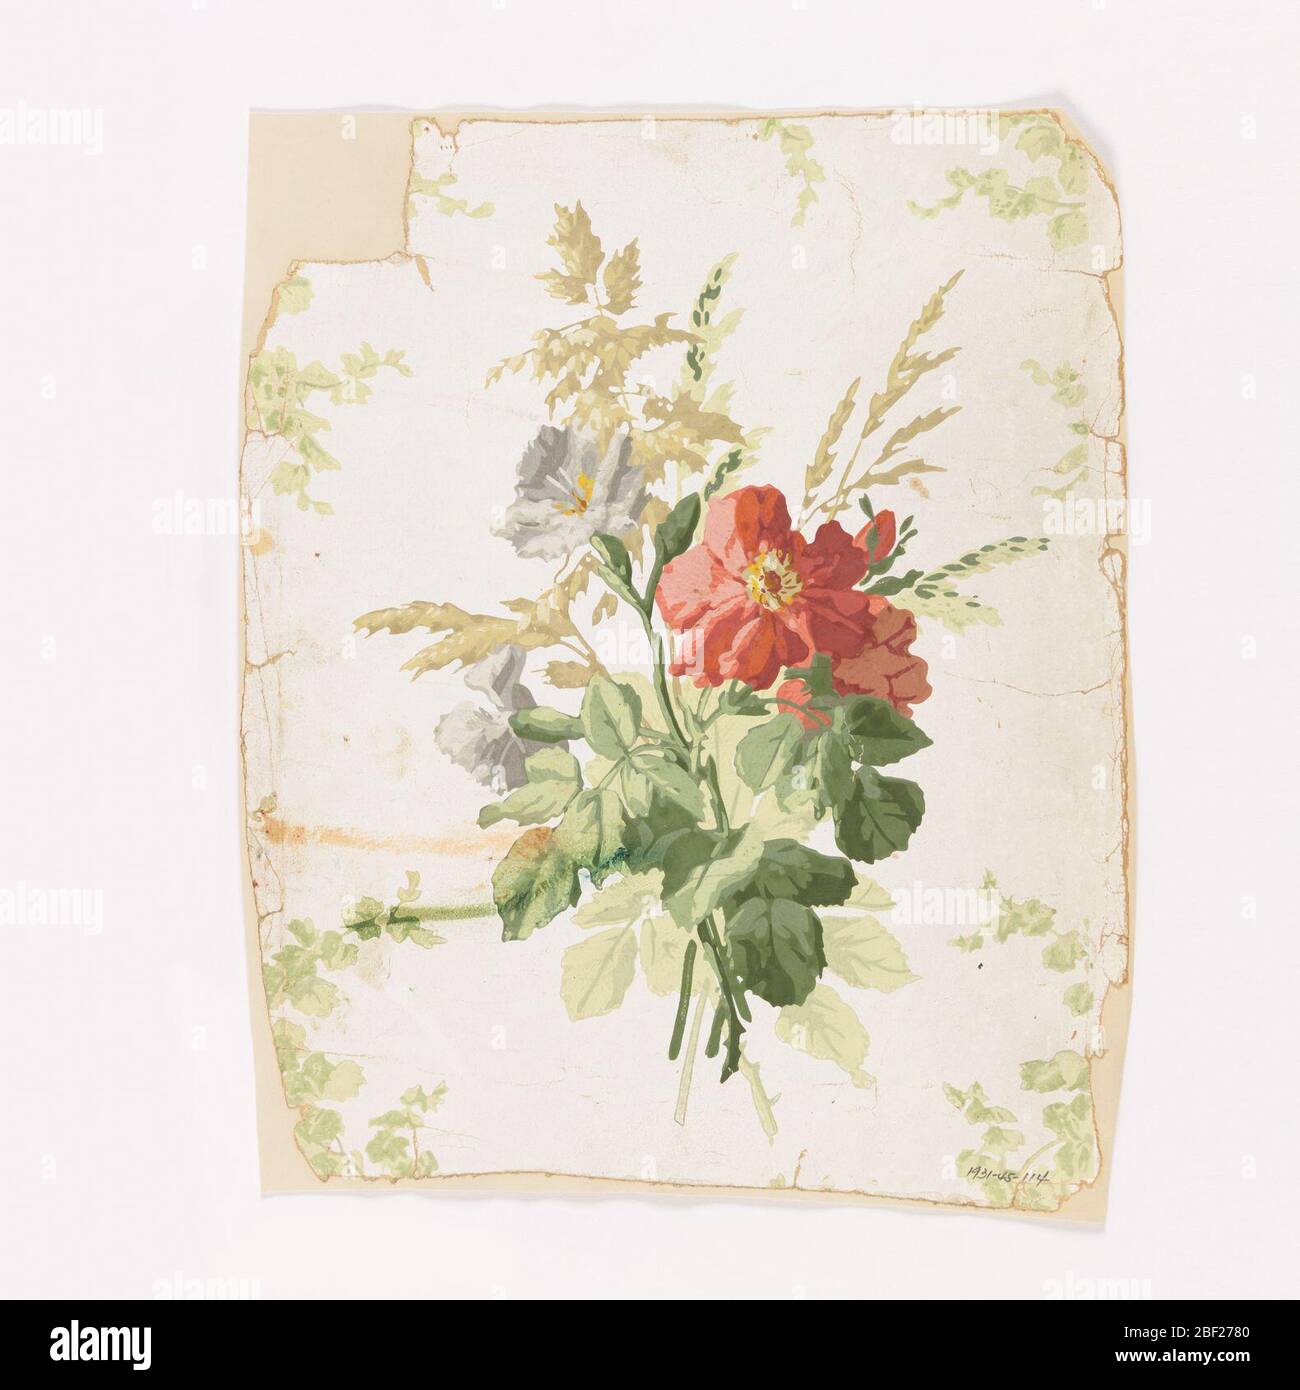 Sidewall. Bouquet of flowers: red roses, blue-gray carnations with green leaves, and yellow-green field grasses. Printed in colors on white satin ground. Stock Photo